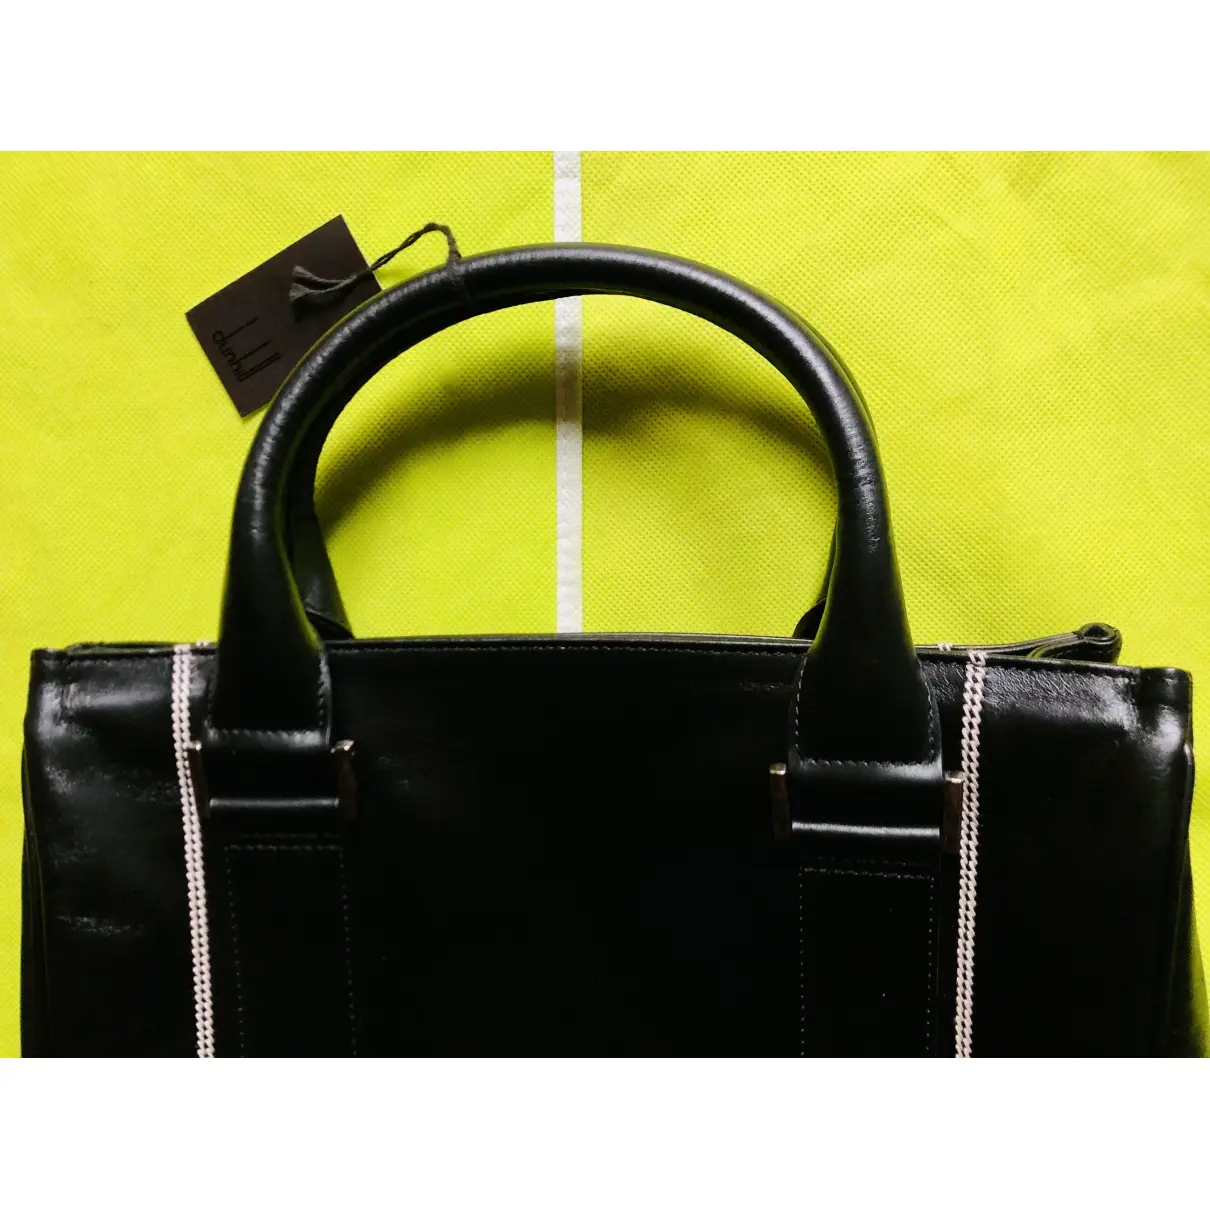 Leather bag Alfred Dunhill